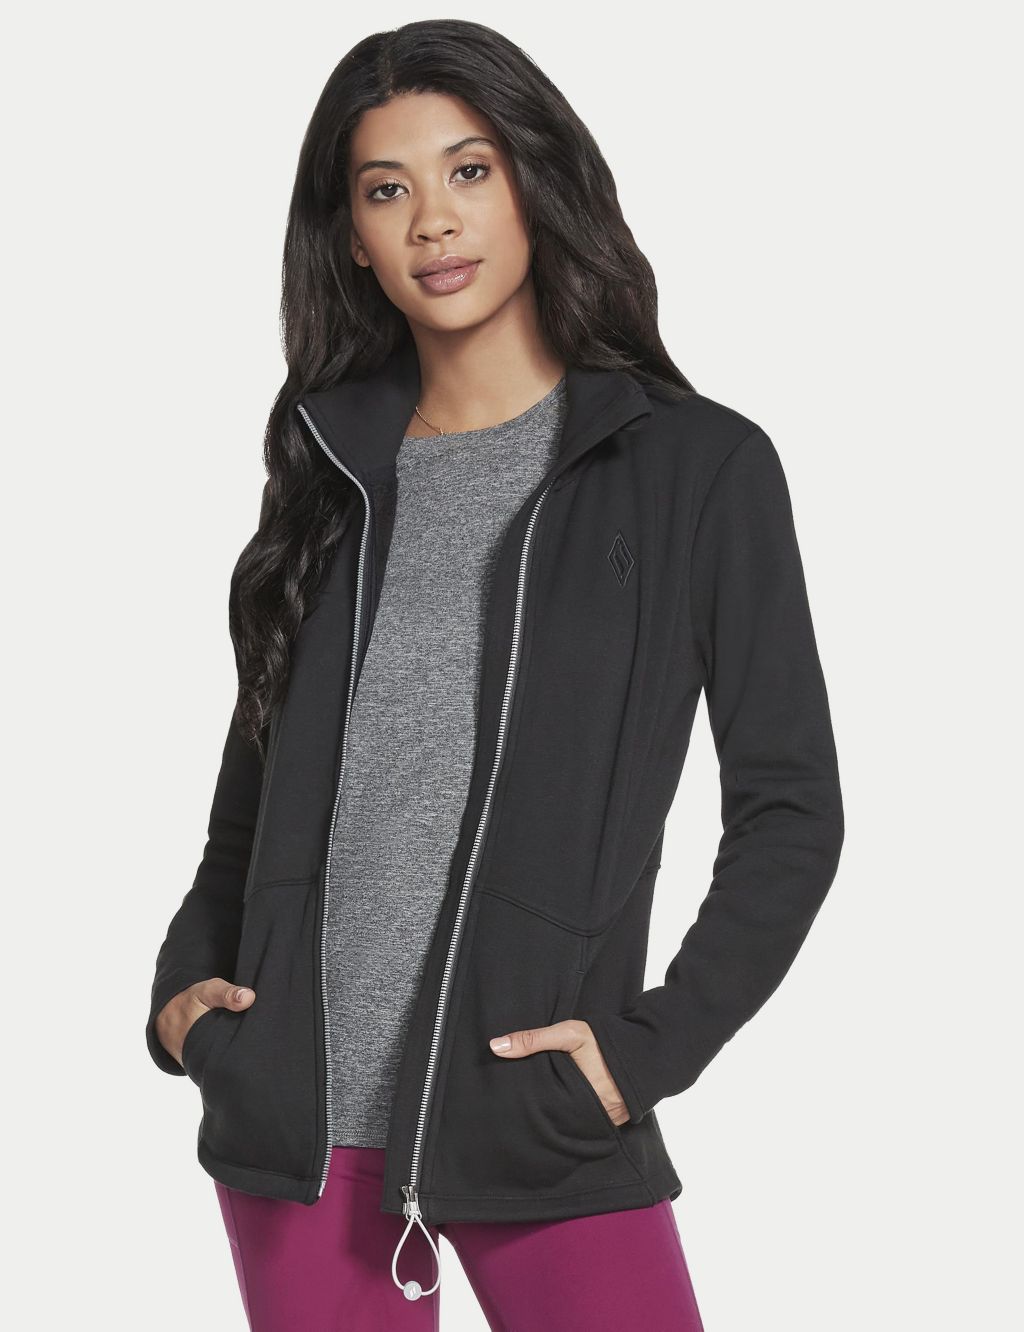 Women’s Sportswear Jackets Available at M&S